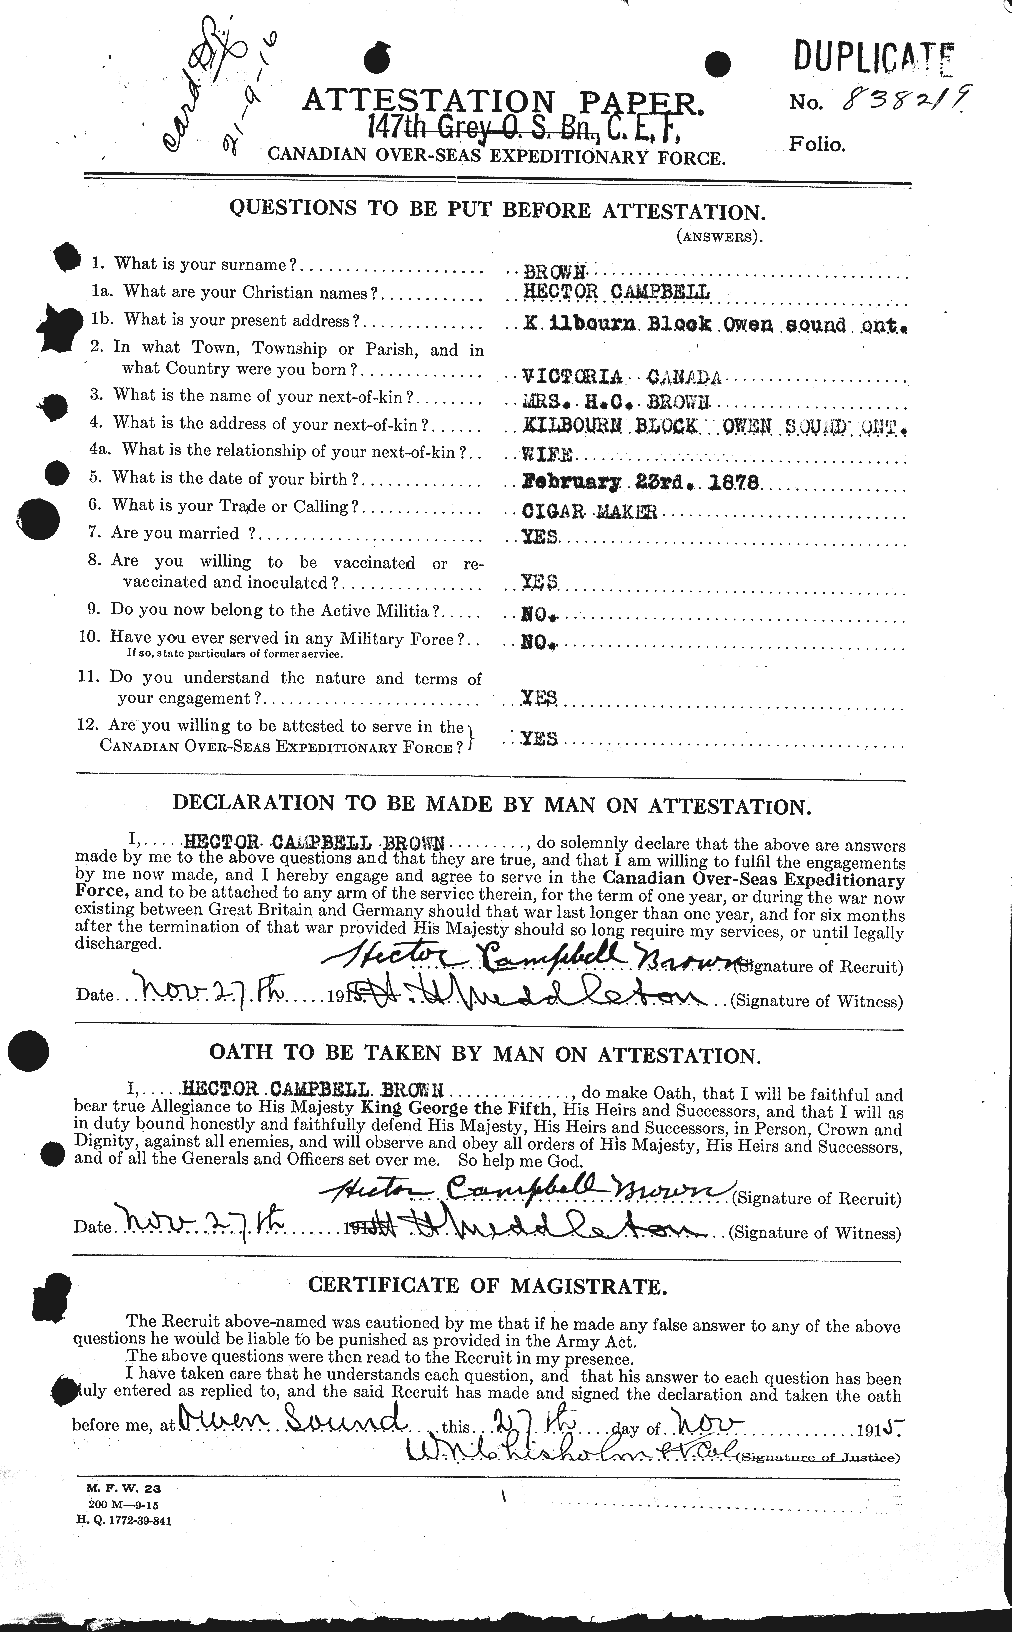 Personnel Records of the First World War - CEF 265497a